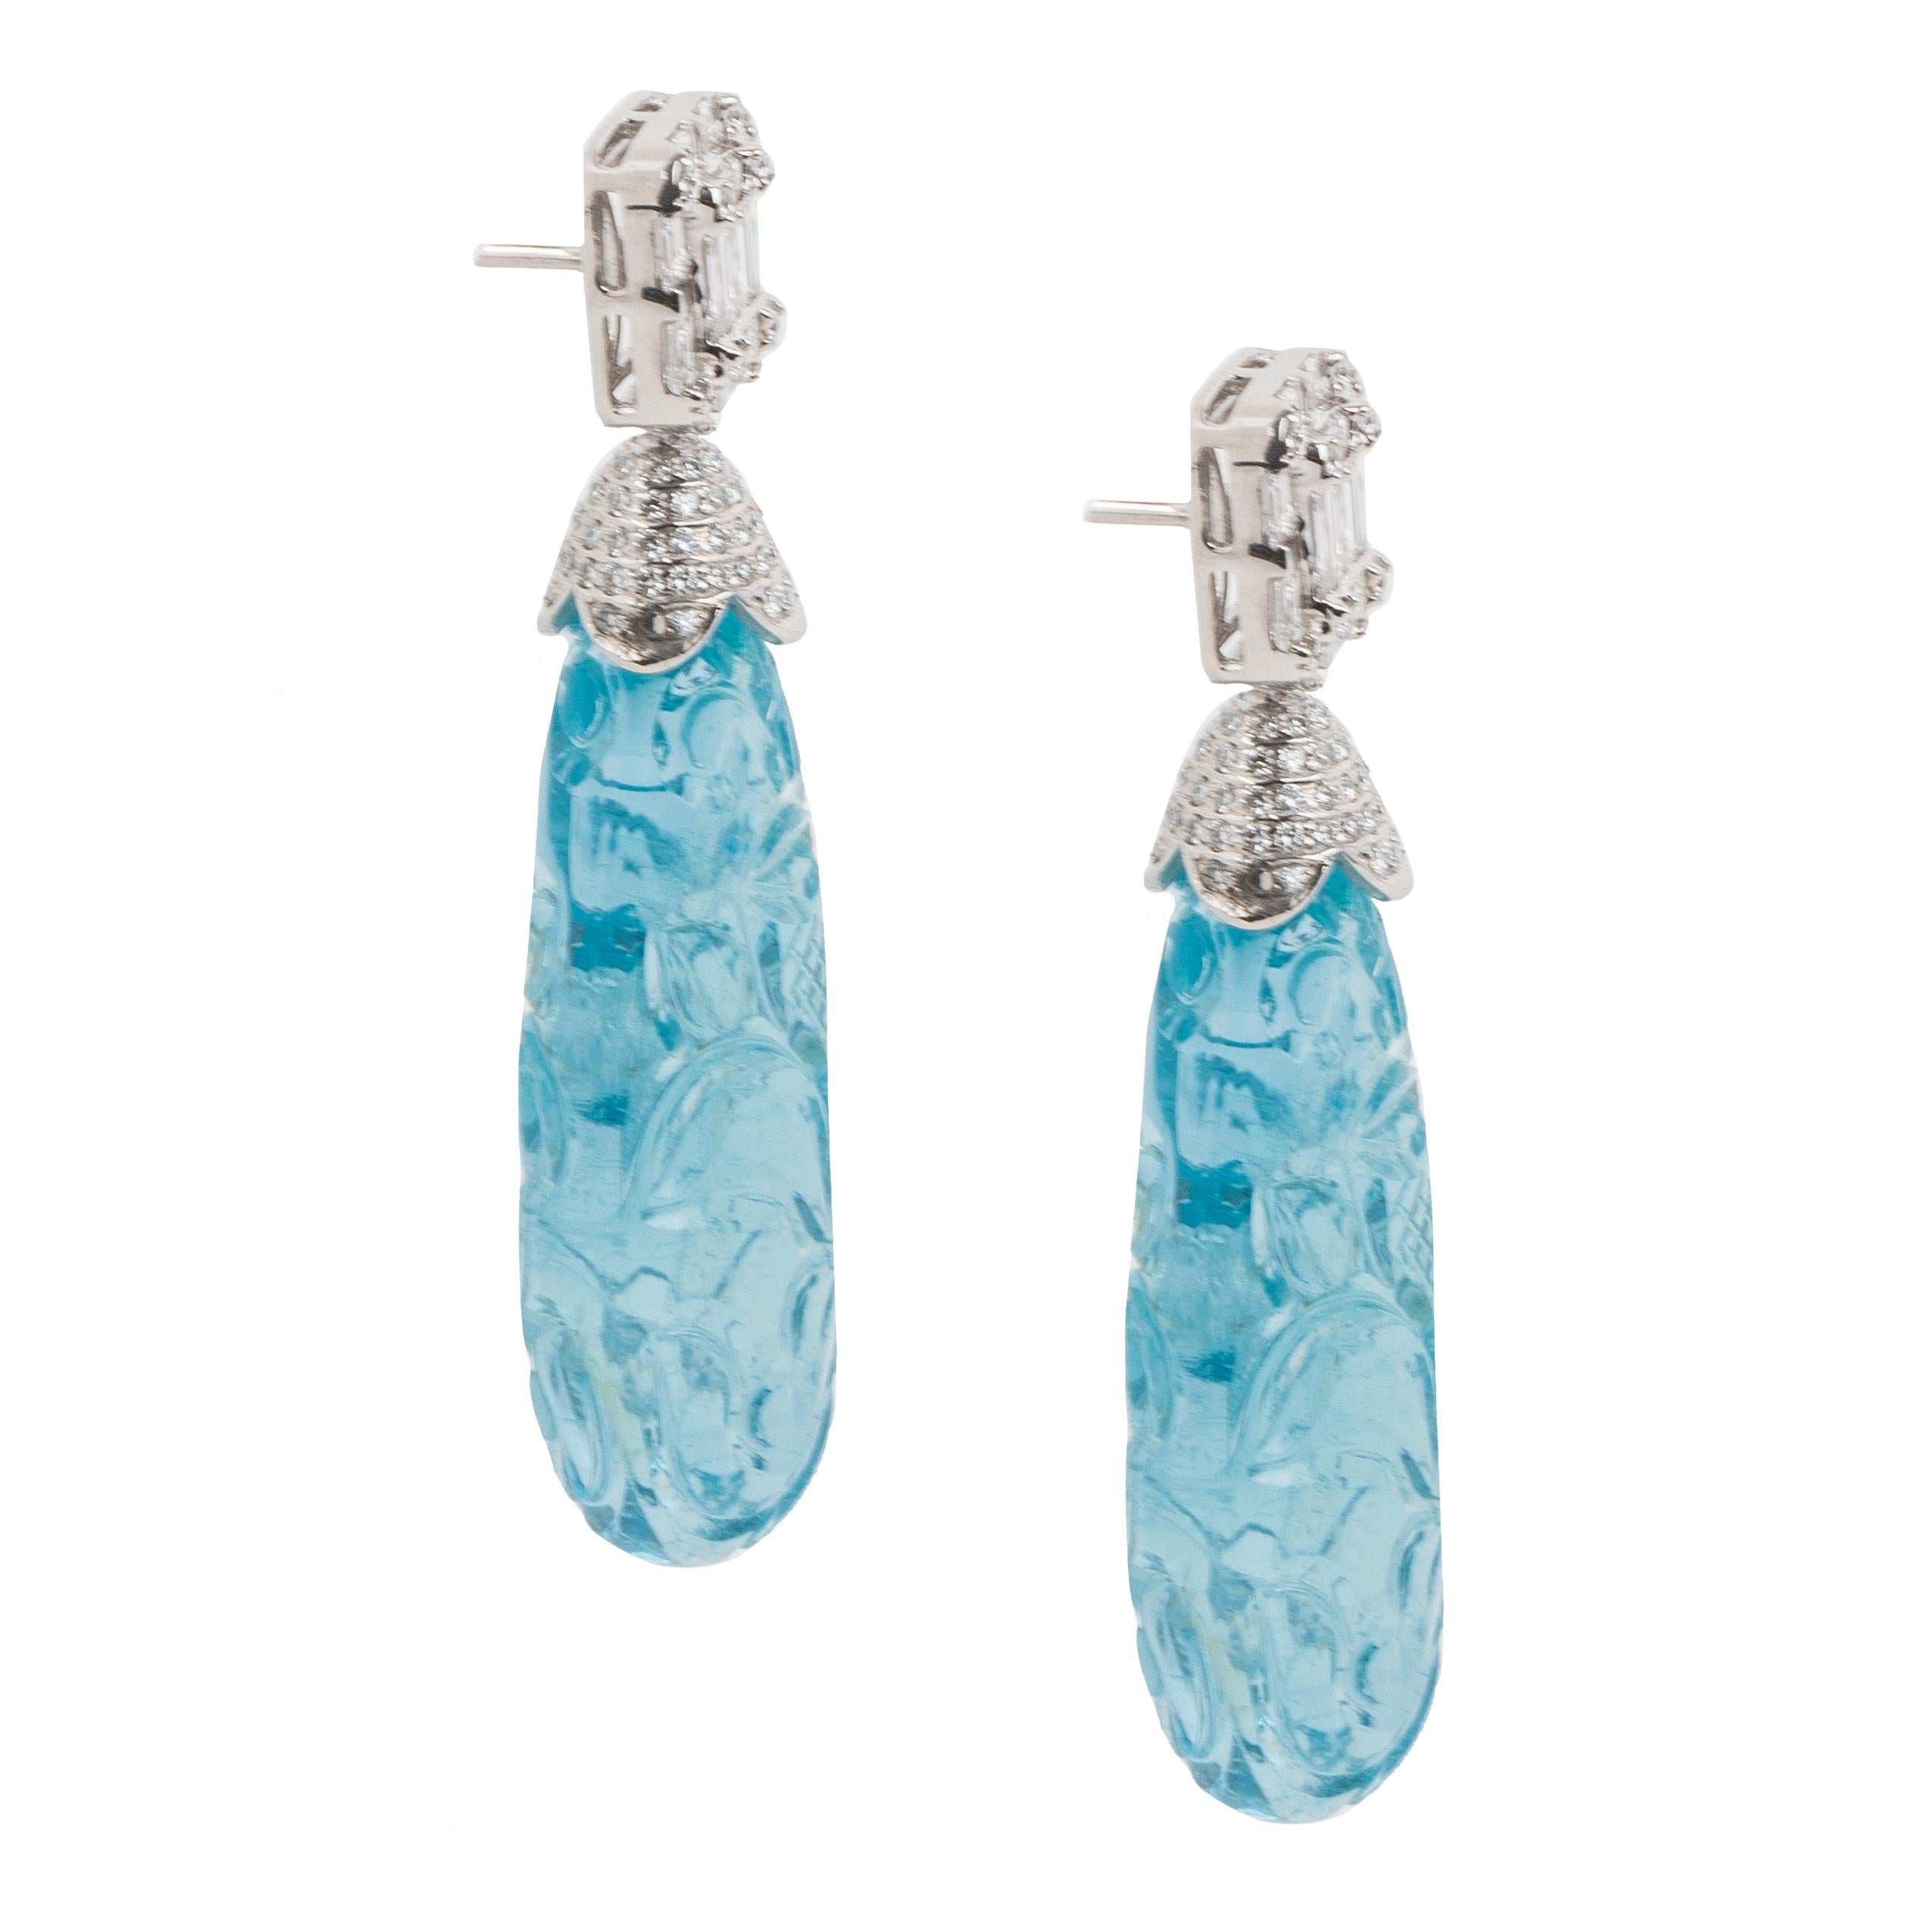 This pair of earrings features an aquamarine stone that has been carved with beautiful floral motifs. The color of the aquamarine is a deep sea blue in a perfectly even shape. The cap and top are studded with diamonds.

Aquamarine measurements -